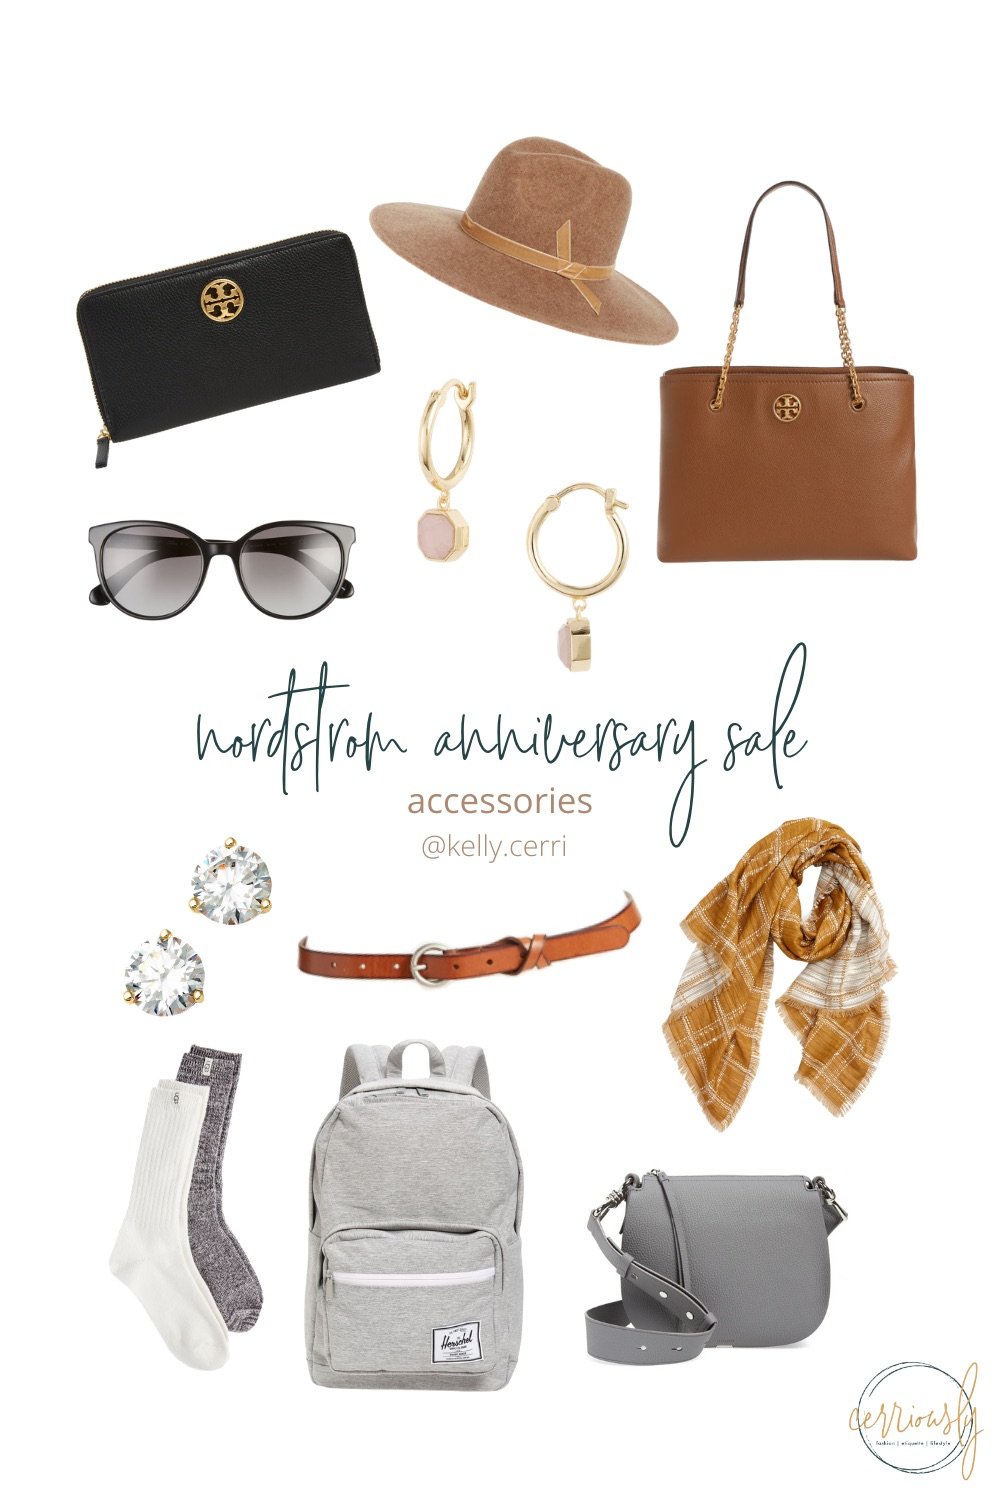 nordstrom anniversary sale finds - accessories